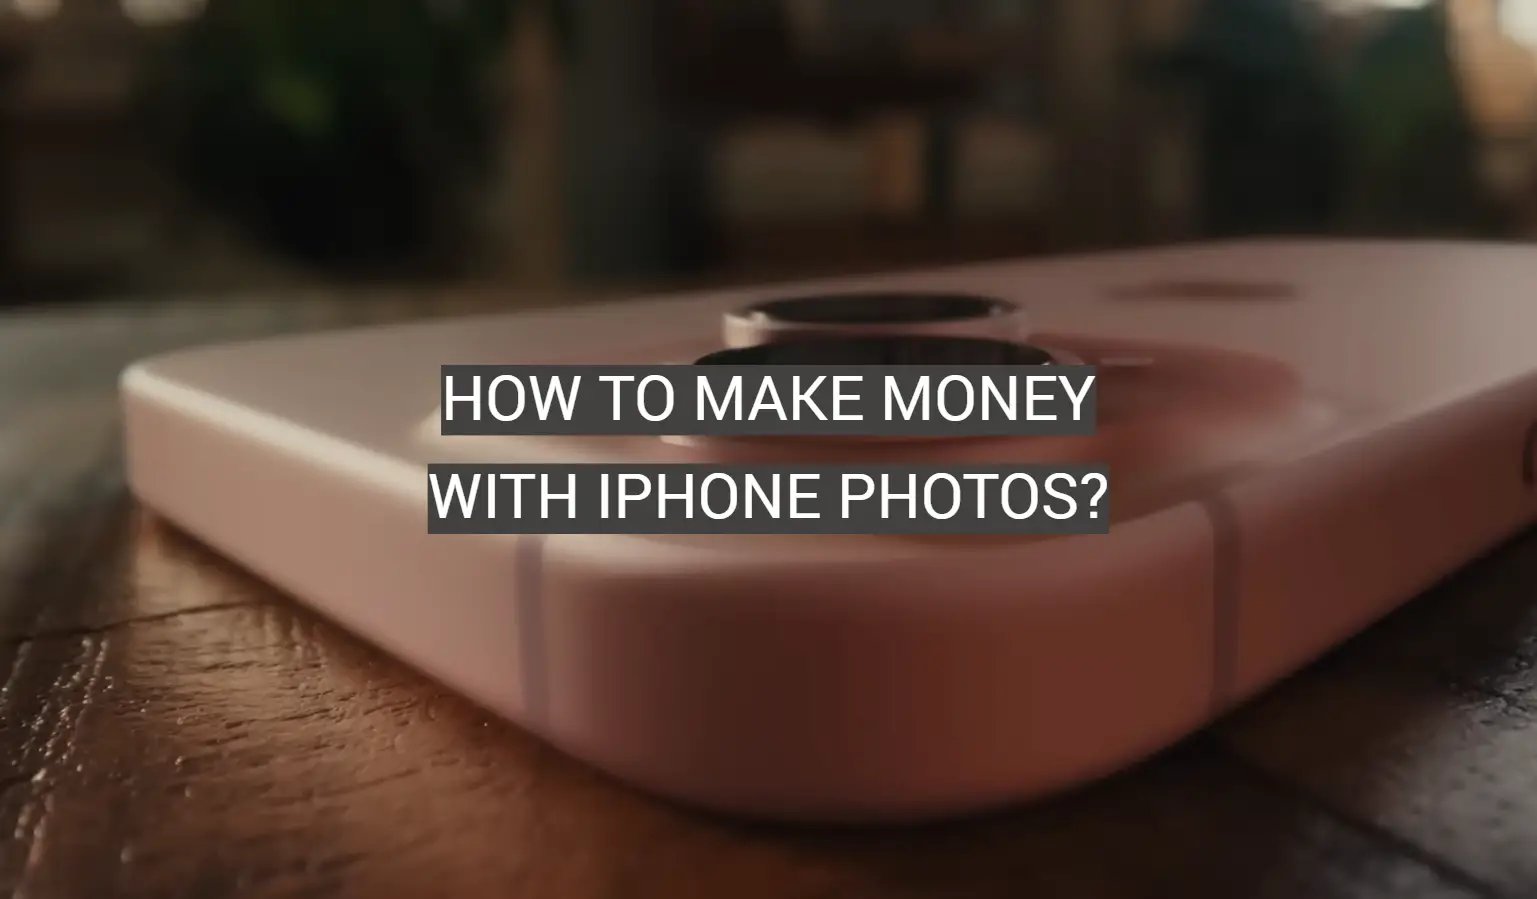 How to Make Money With iPhone Photos?